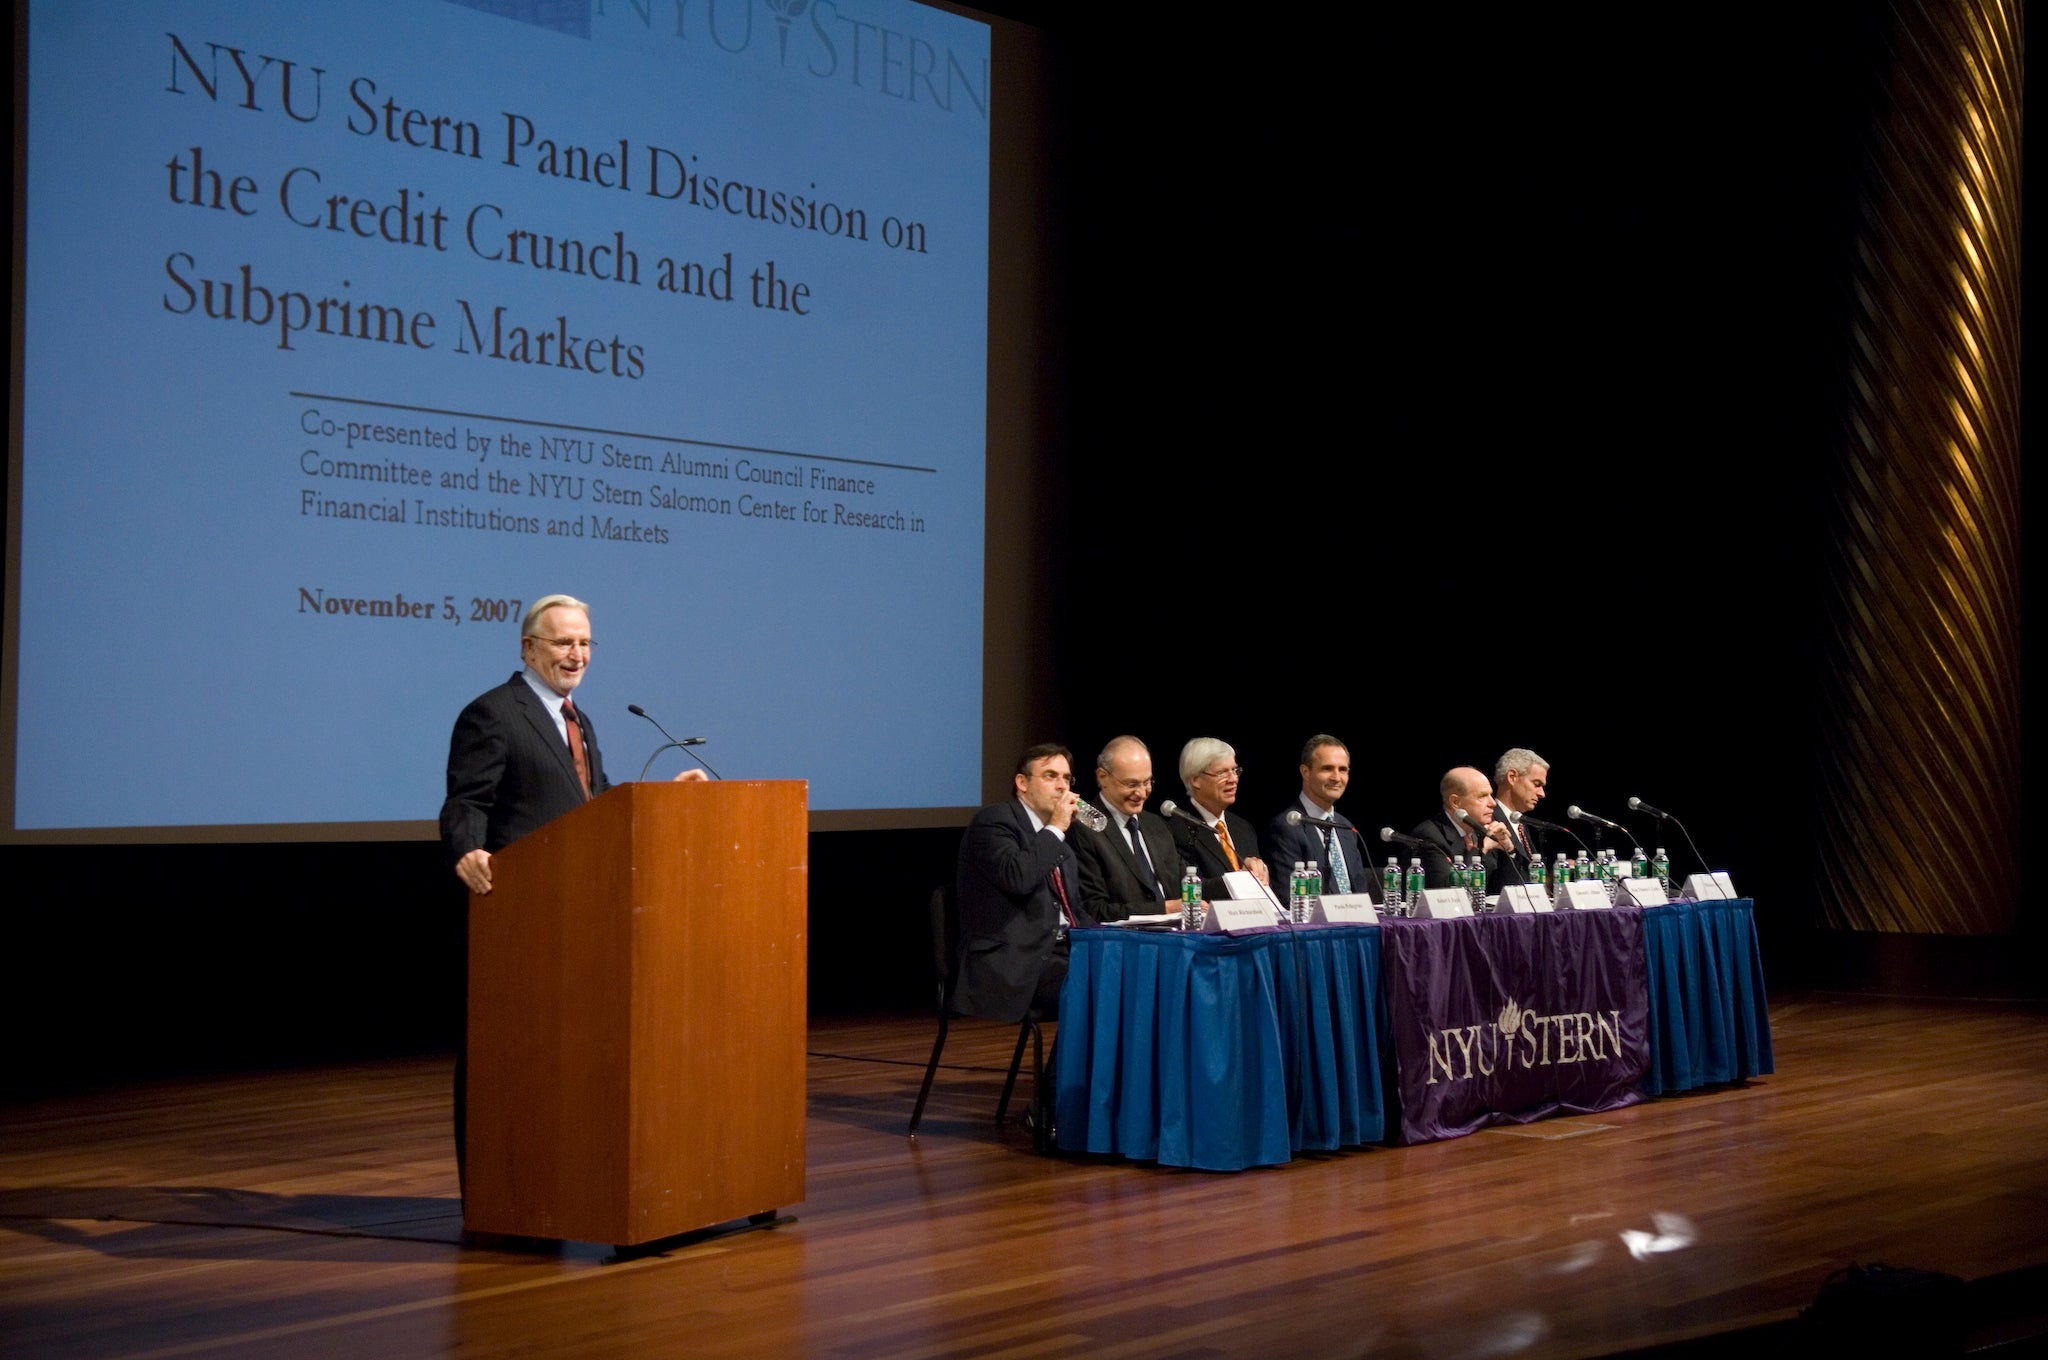 Thomas F. Cooley speaks at a lectern during a panel discussion